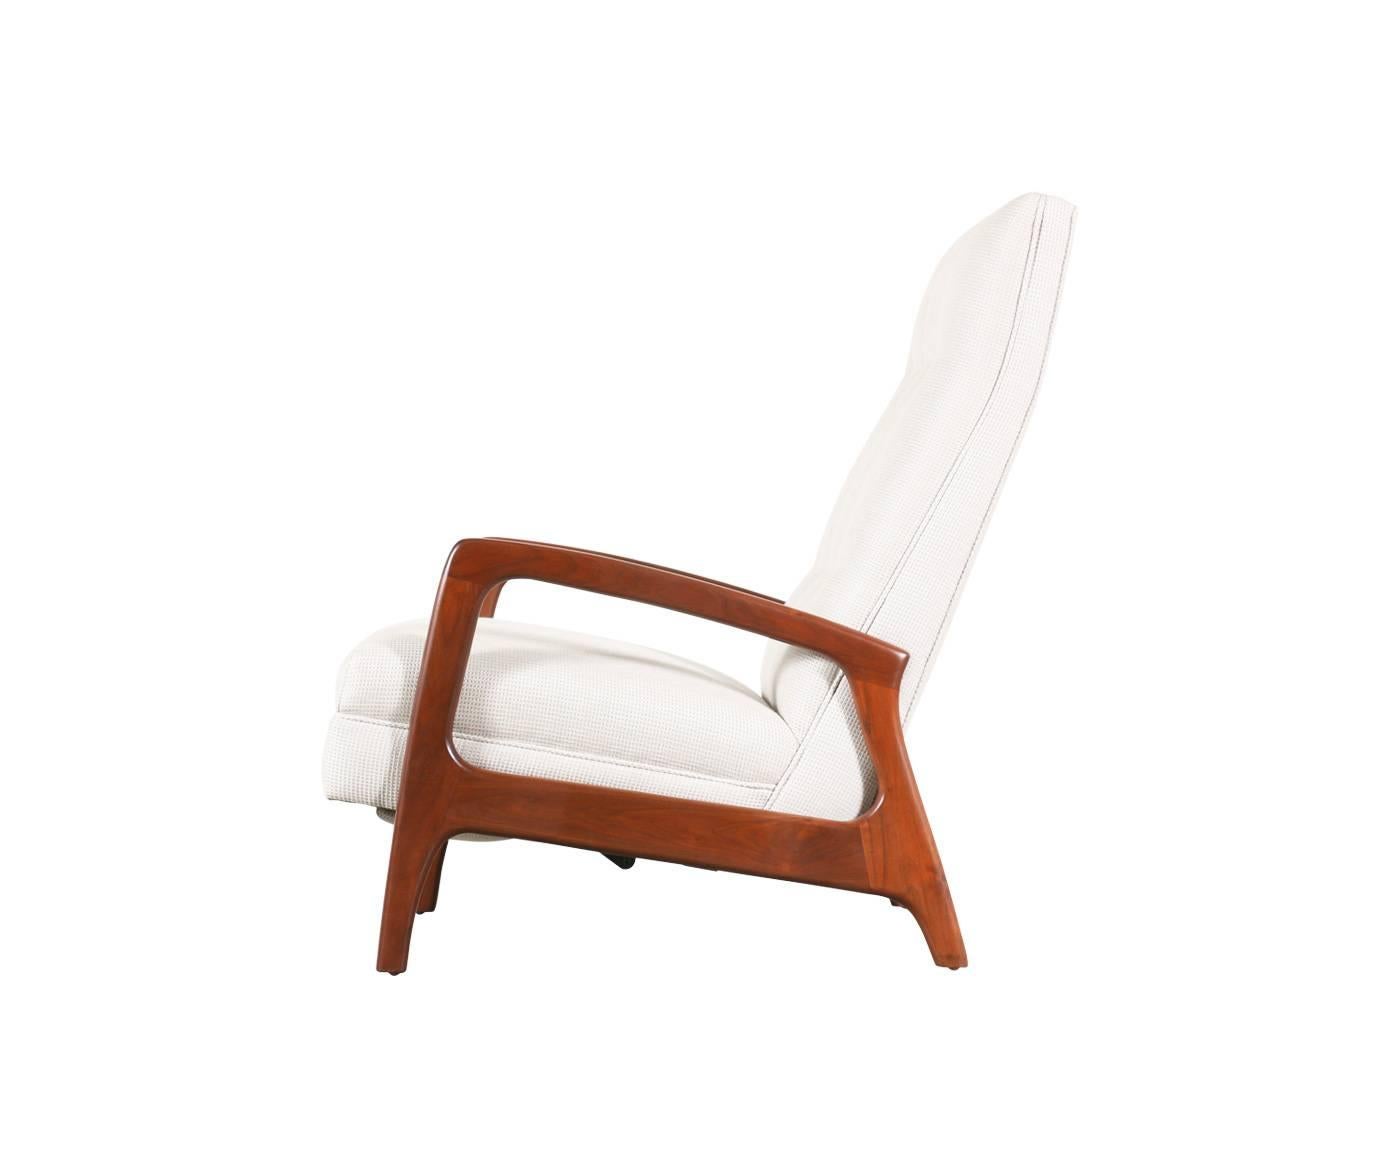 Adrian Pearsall reclining lounge chair. Designer: Adrian Pearsall.
Manufacturer: Craft Associates.
Period/Style: Mid-Century Modern.
Country: United States.
Date: 1960s.

Dimensions: 39″ H x 24.75″ W x 38″ D.
Seat height: 16.5″.
Materials: